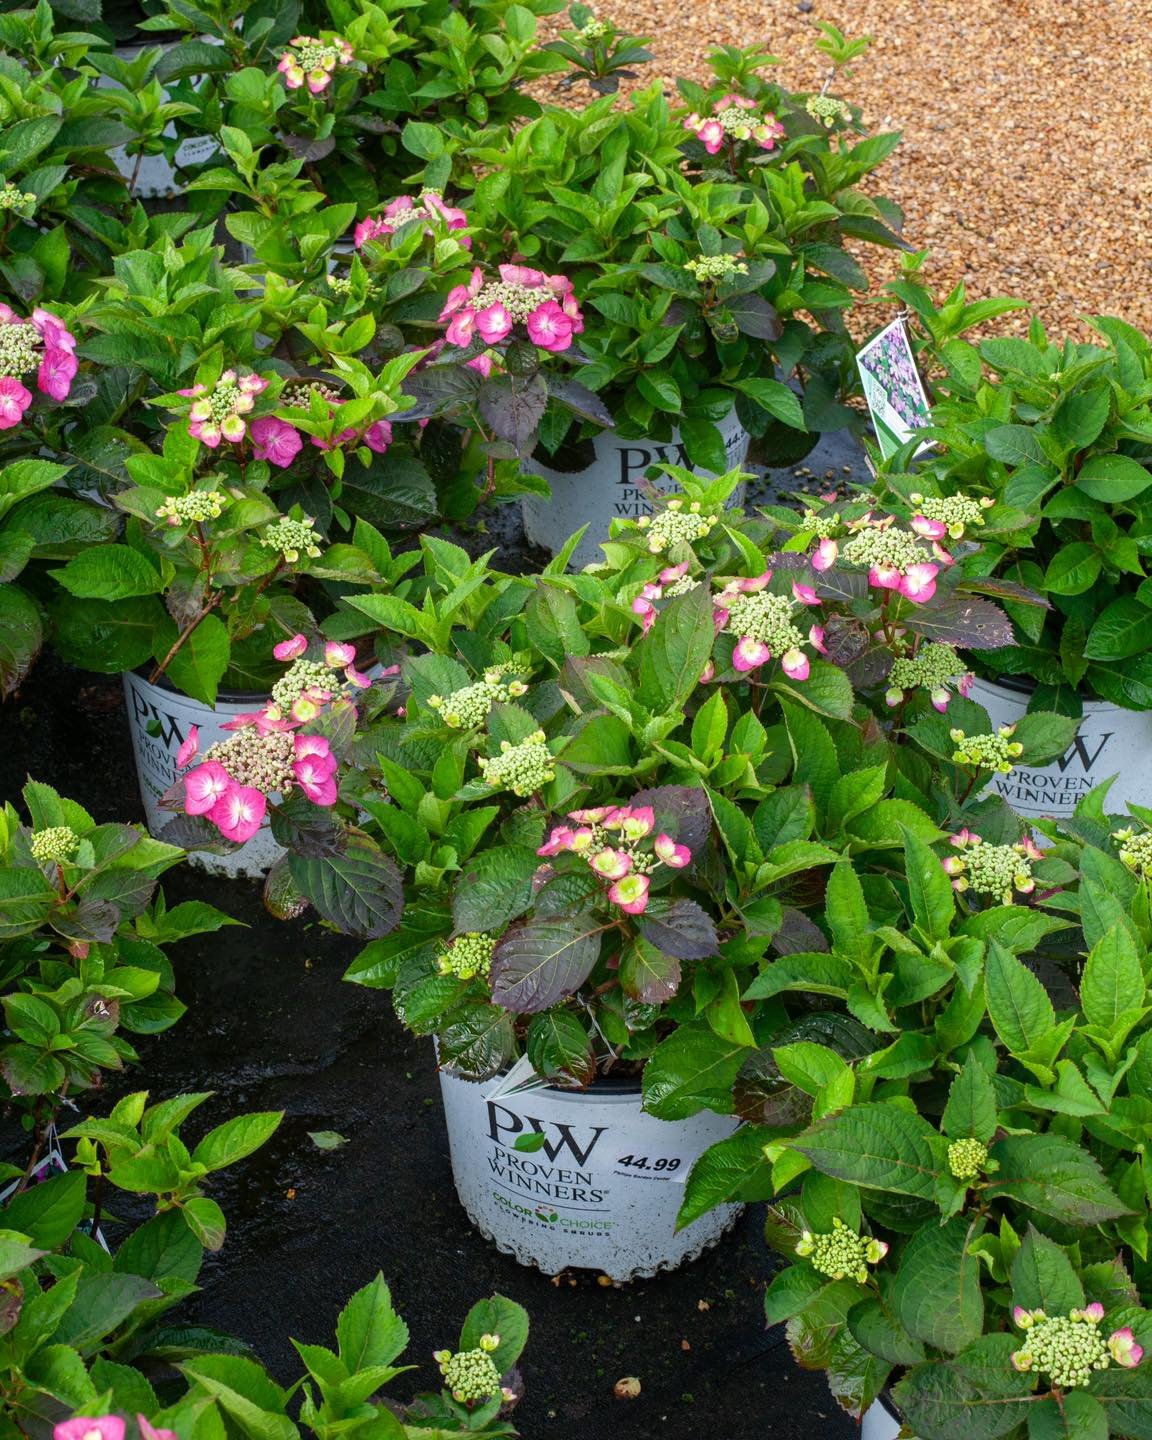 Some new @provenwinners Hydrangeas are blooming! Tiny Tuff Top Fun and Tiny Tuff Stuff are both Mountain Hydrangeas. They would need afternoon shade to perform. Fairytrail Bride is a new type of Hydrangea called Cascade! It has a horizontal, spreadin